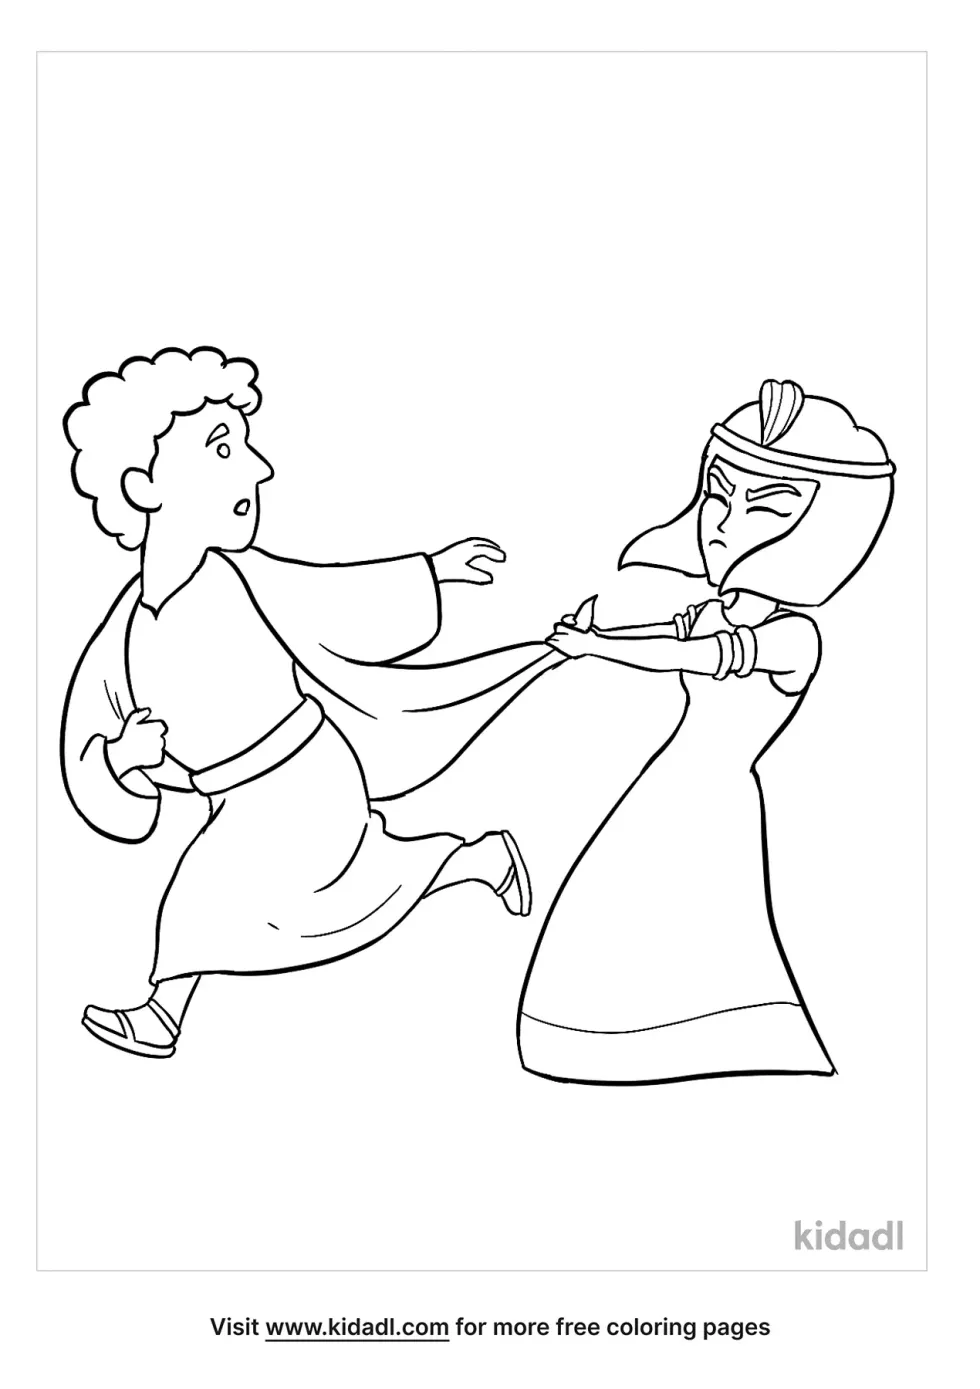 Joseph And Potiphar's Wife Coloring Page